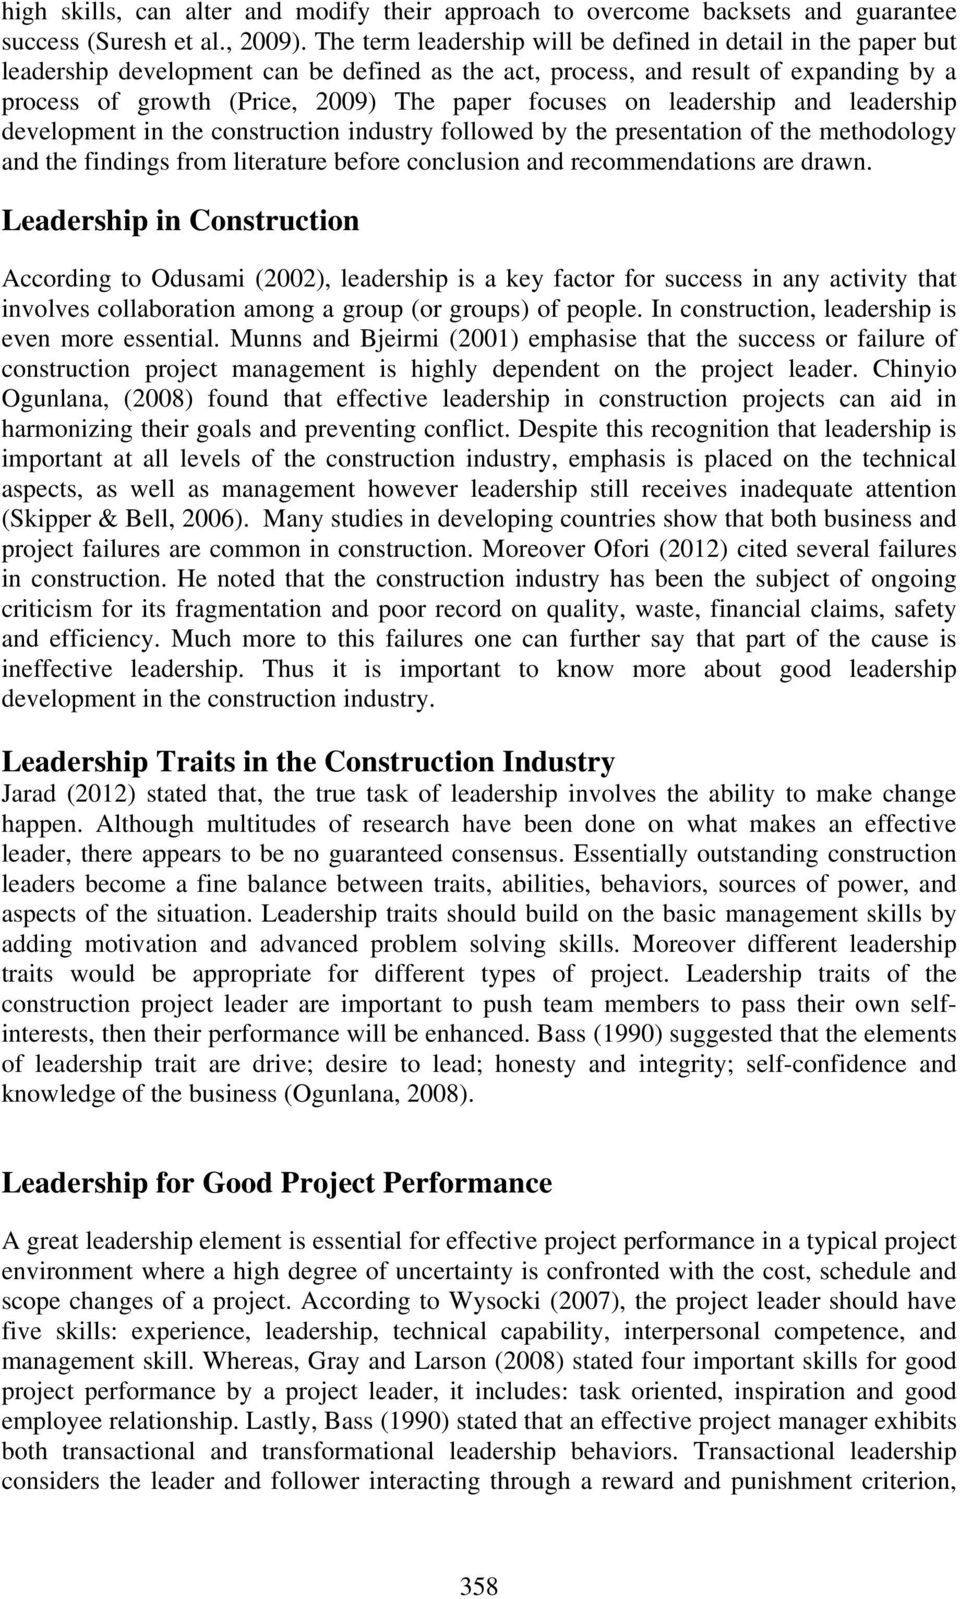 focuses on leadership and leadership development in the construction industry followed by the presentation of the methodology and the findings from literature before conclusion and recommendations